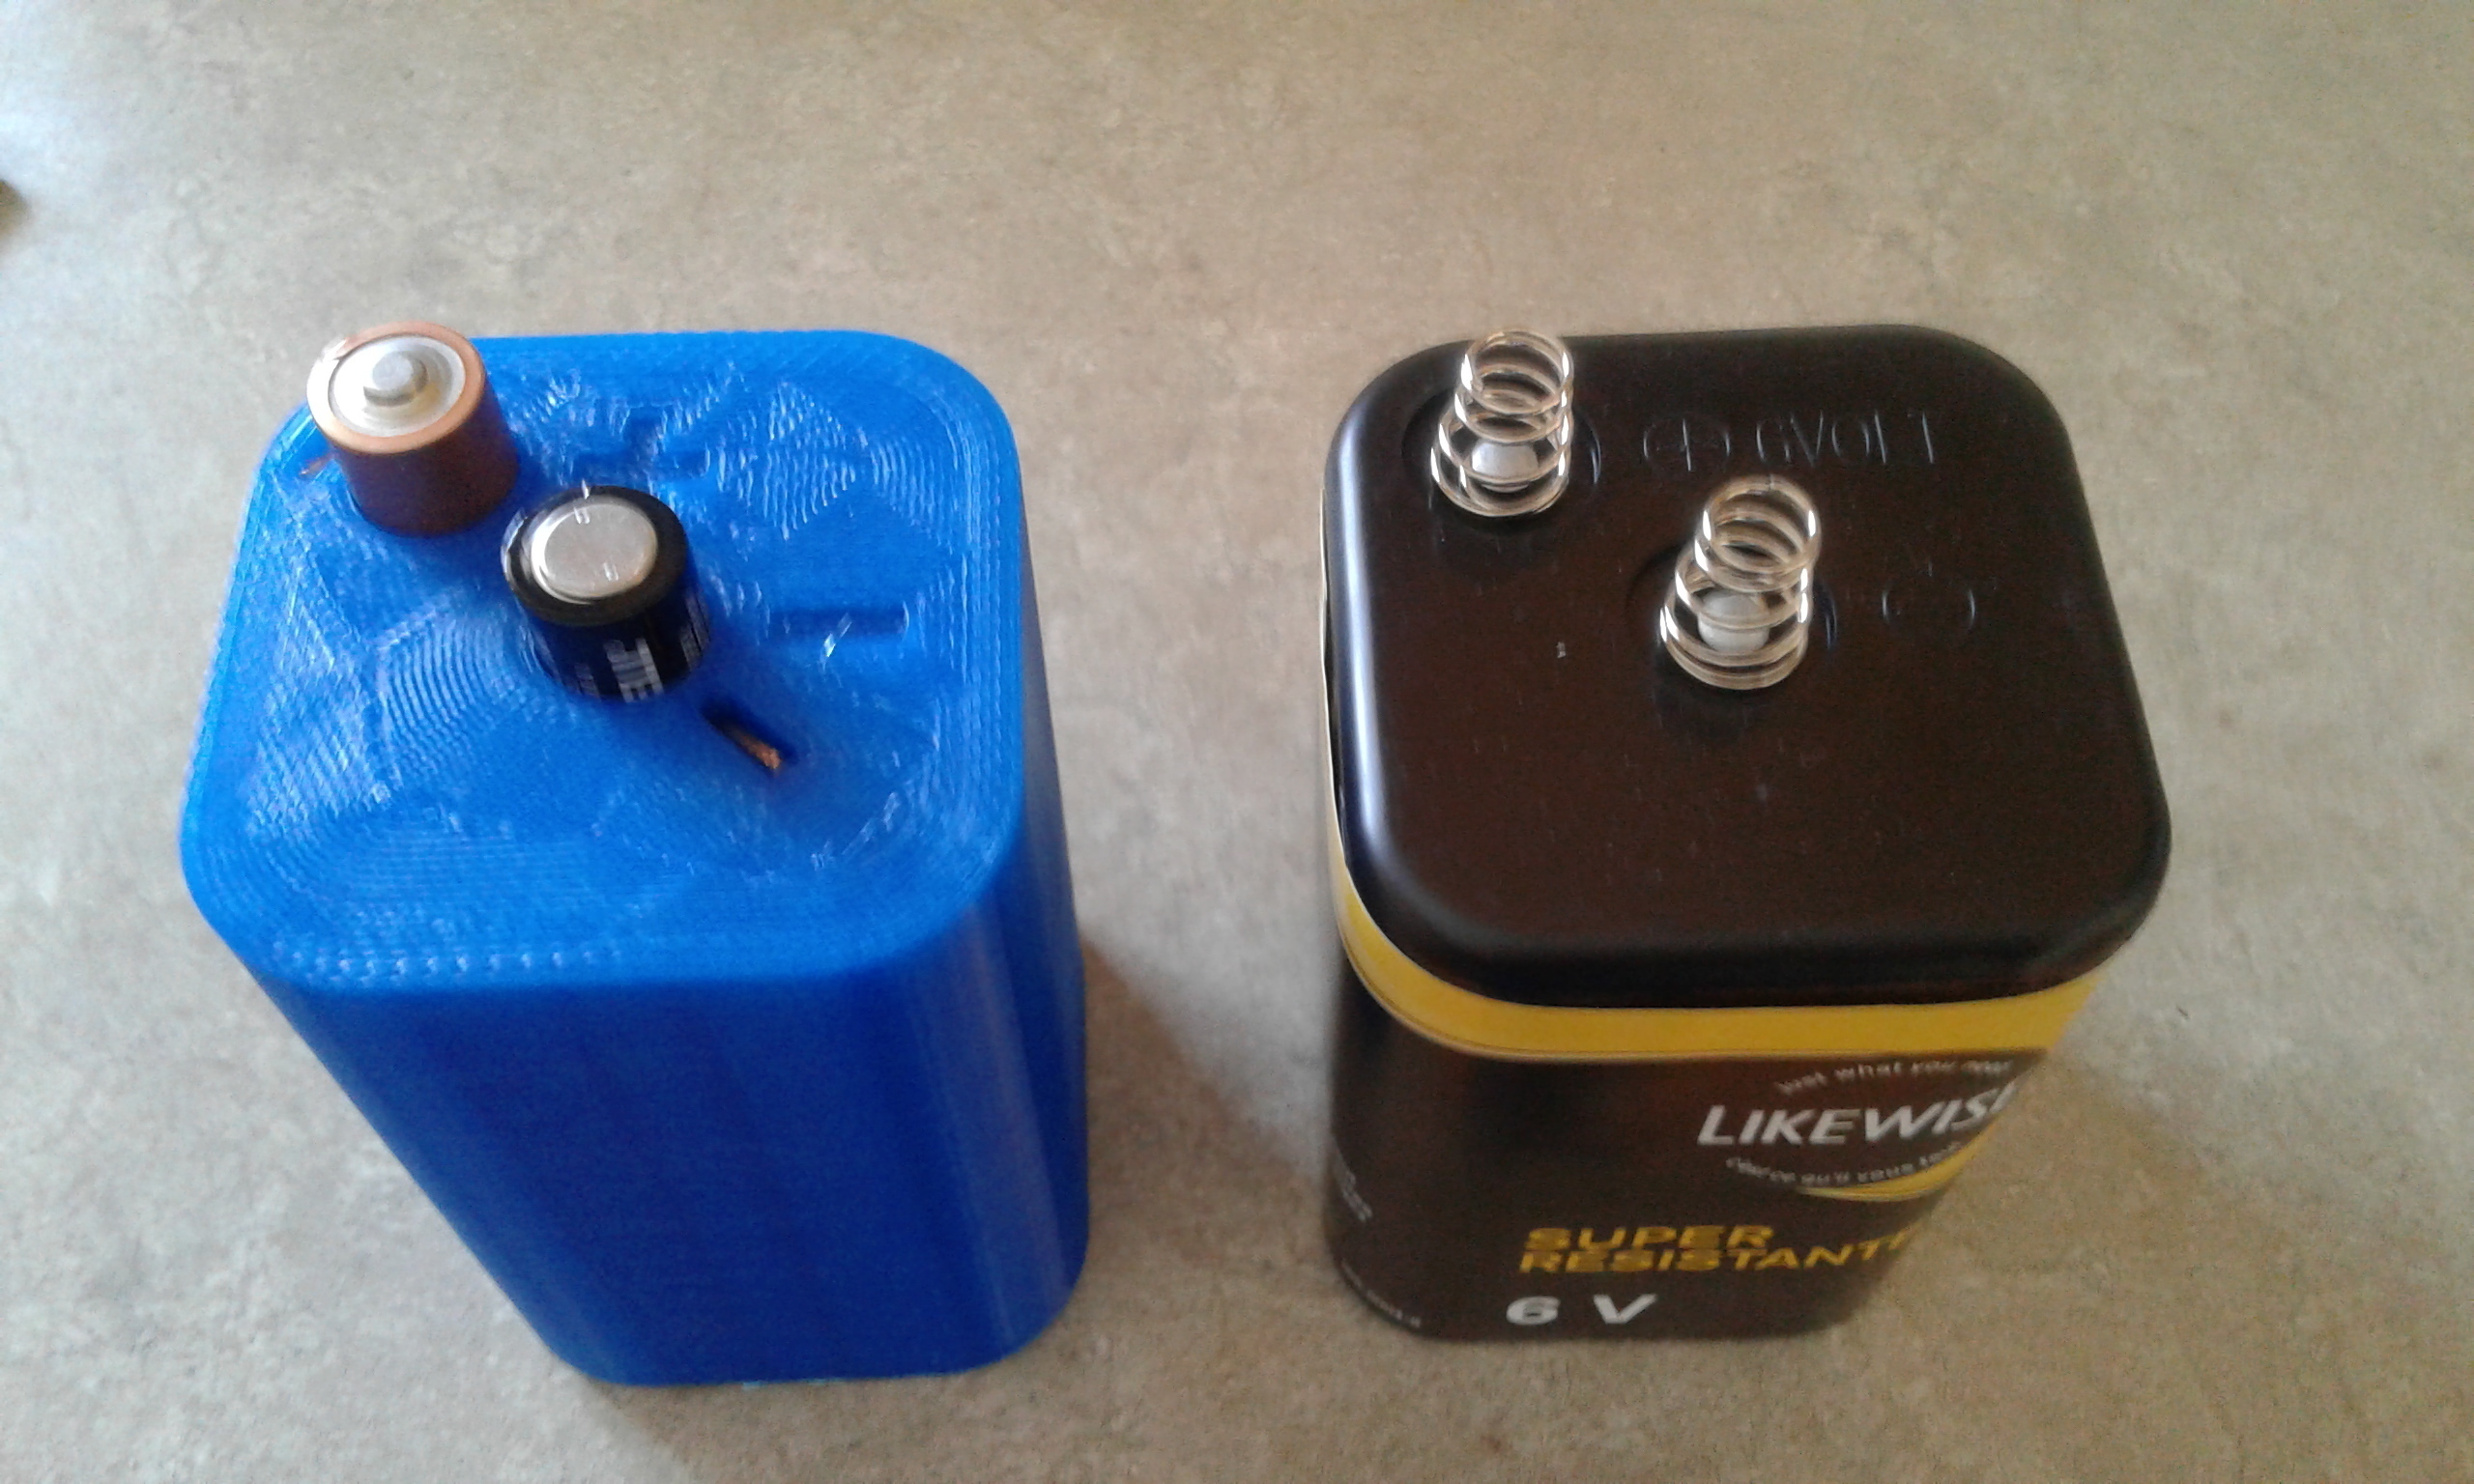 3D Printed 6 Volt Lantern battery AA adapter by Peterthinks